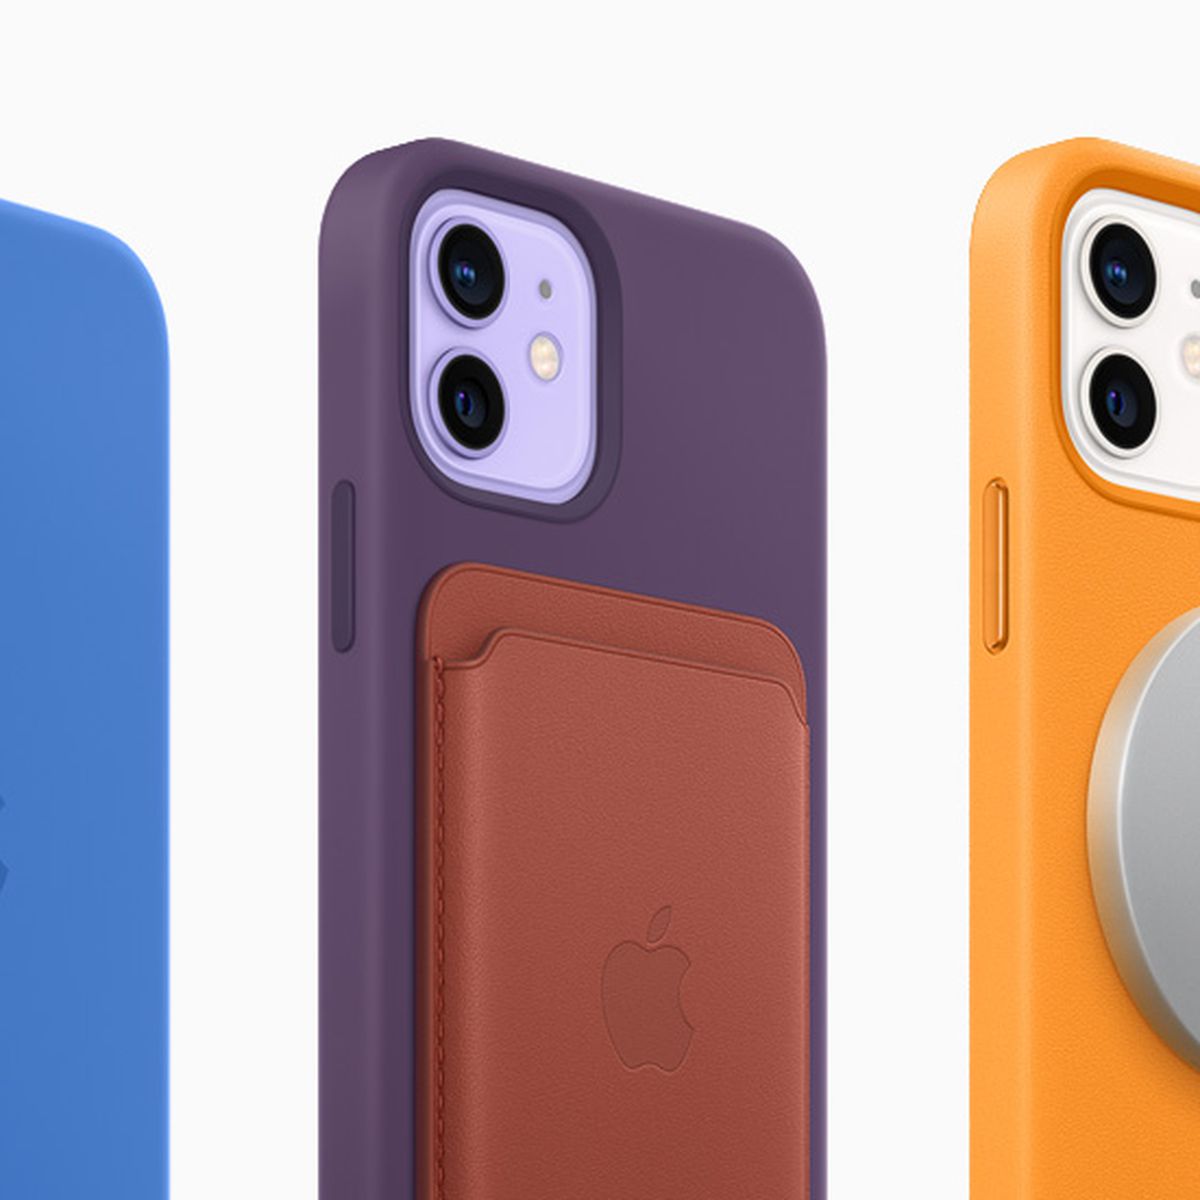 Apple Rolls Out New Spring Accessories Including Colorful Iphone Cases Apple Watch Bands And Airtags Holders Macrumors